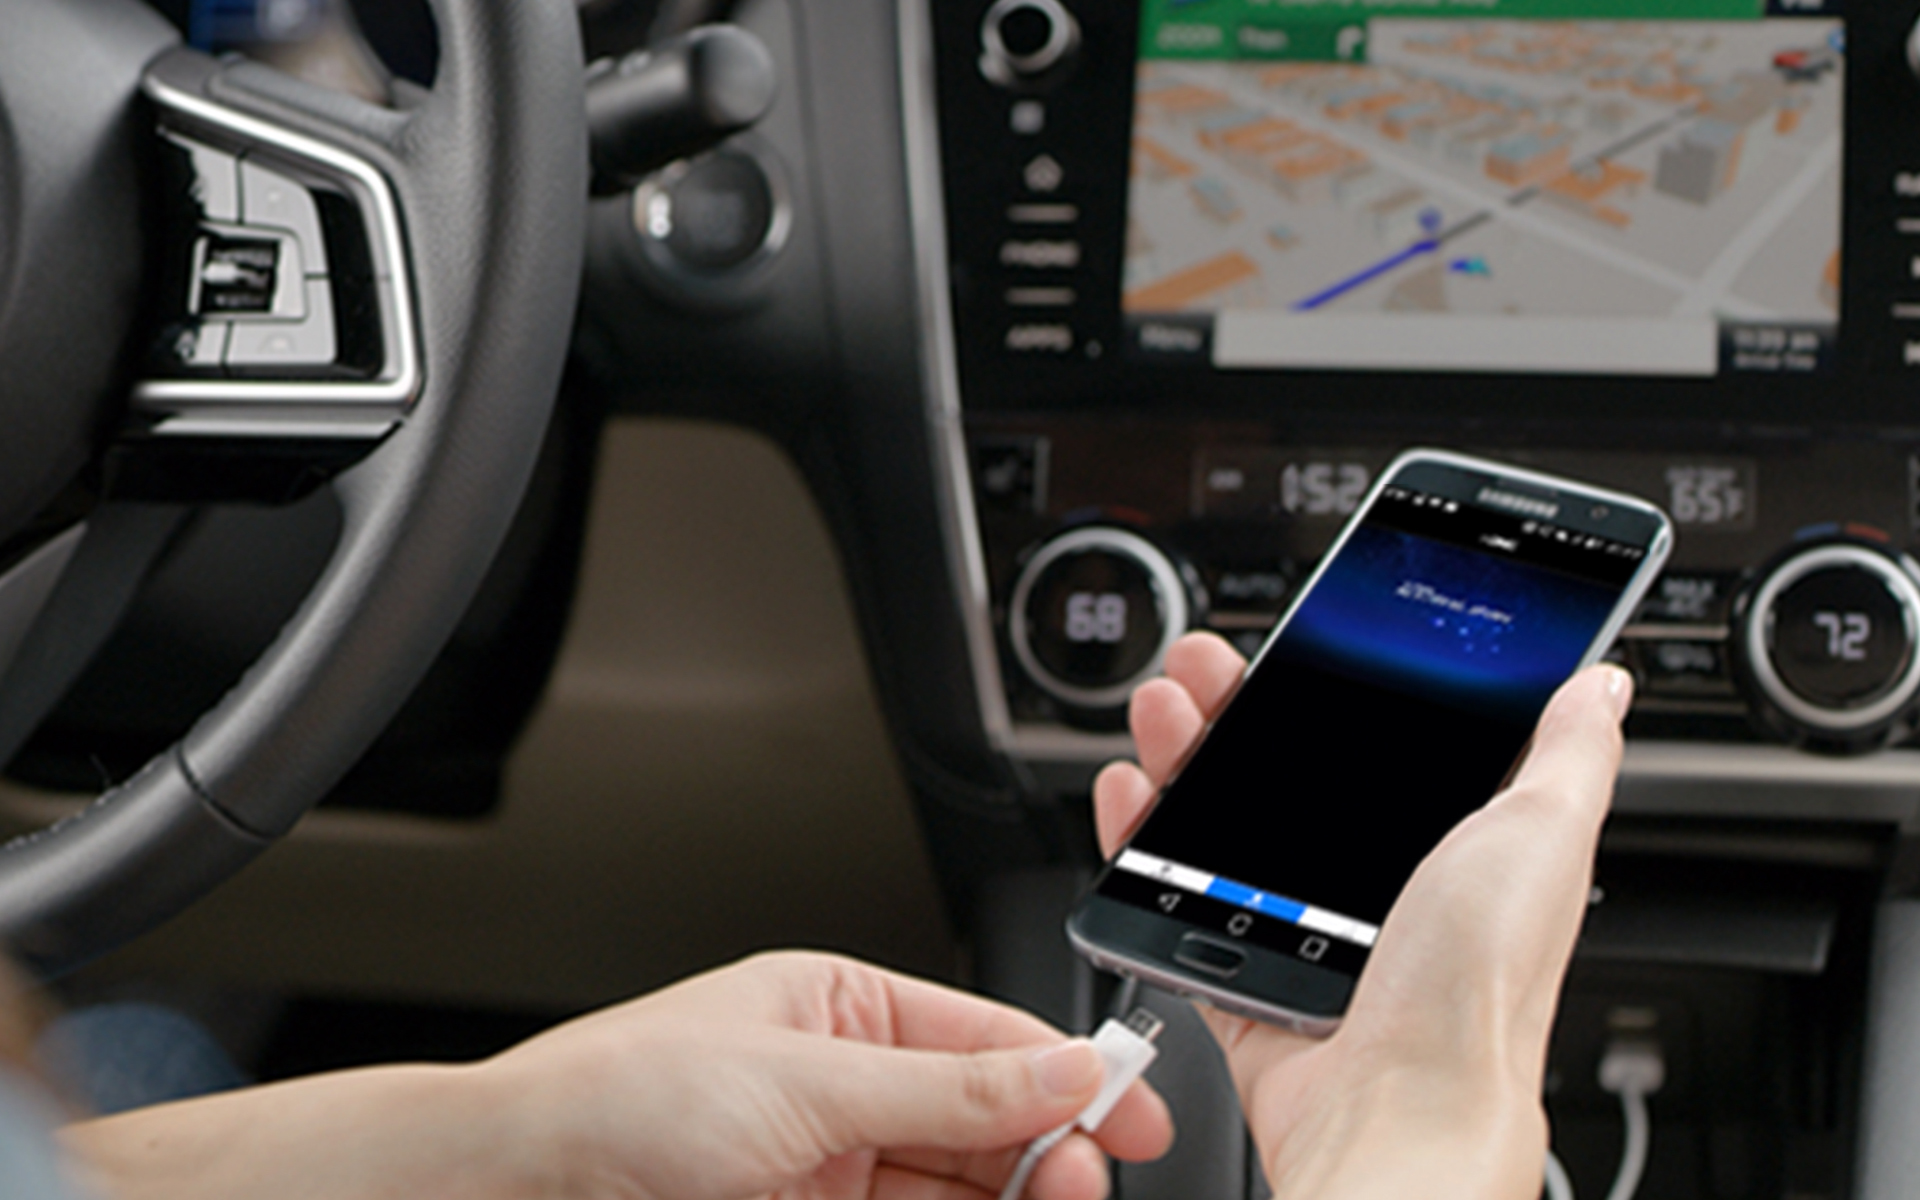 Hand holding a smartphone with the MySubaru app shown on the screen.